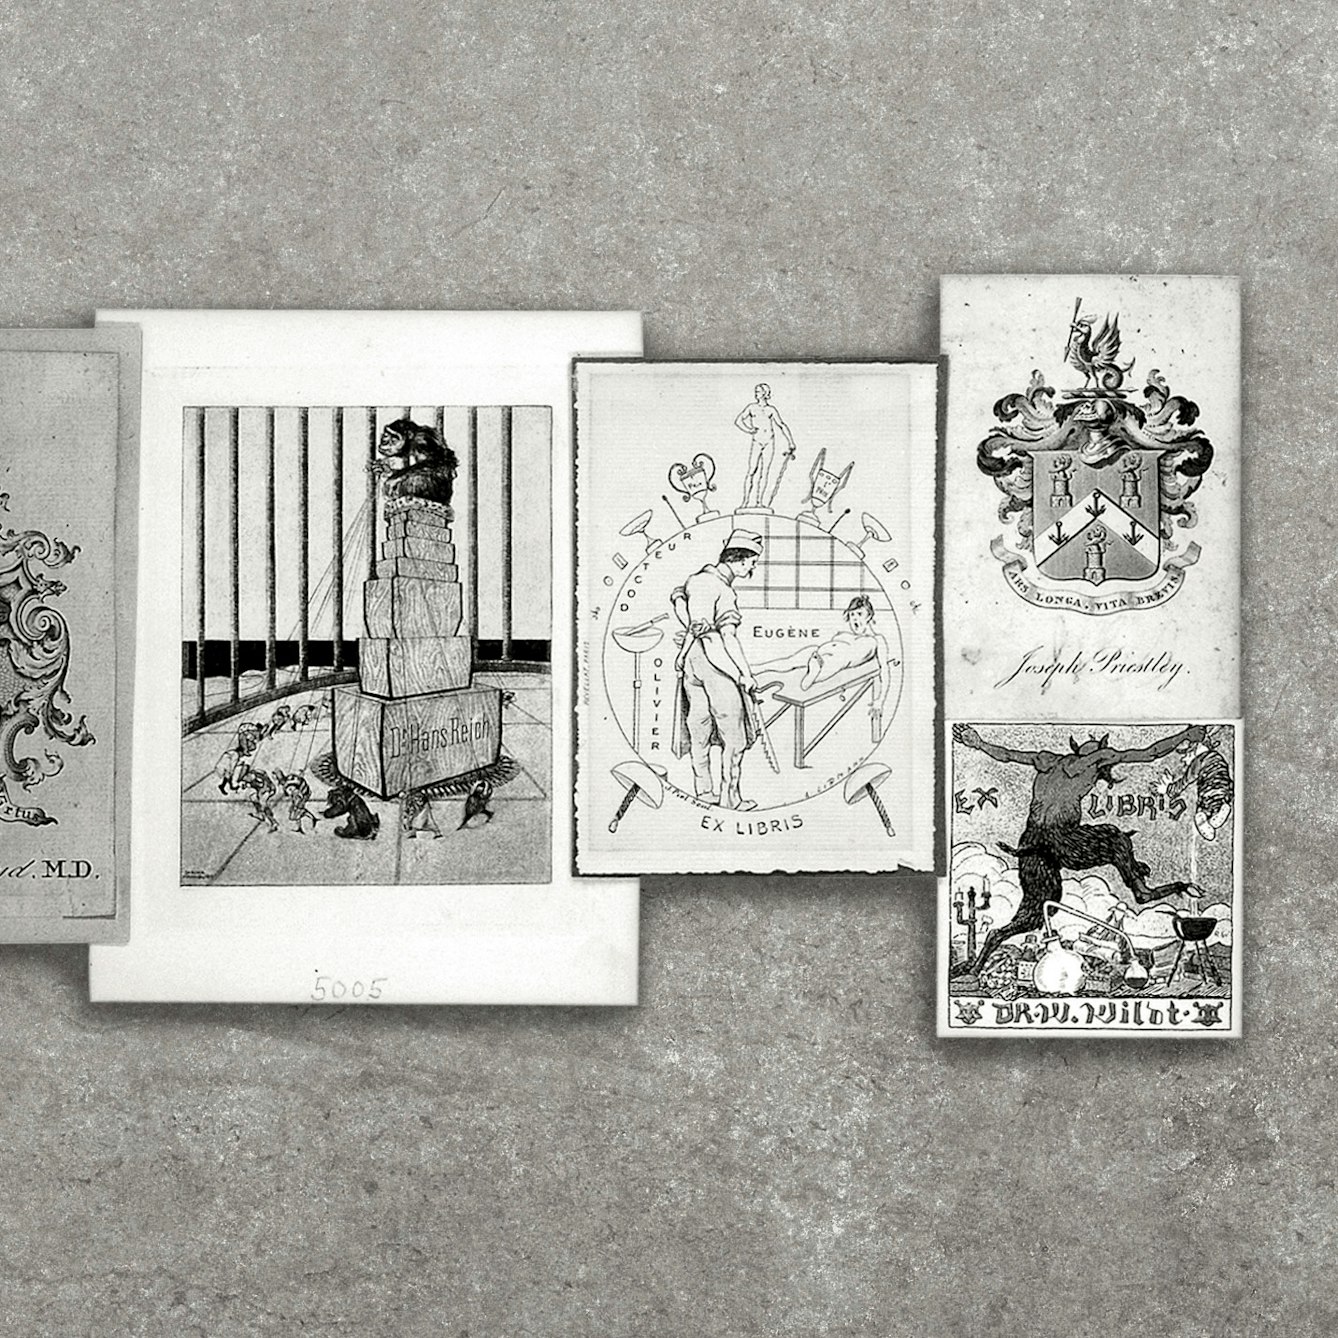 A selection of English, French, and German bookplates.  The pictures on the bookplates include coats of arms, surgery being performed, and a devil trampling on chemistry equipment. the group of bookplates have been photographed against a grey concrete textured background.